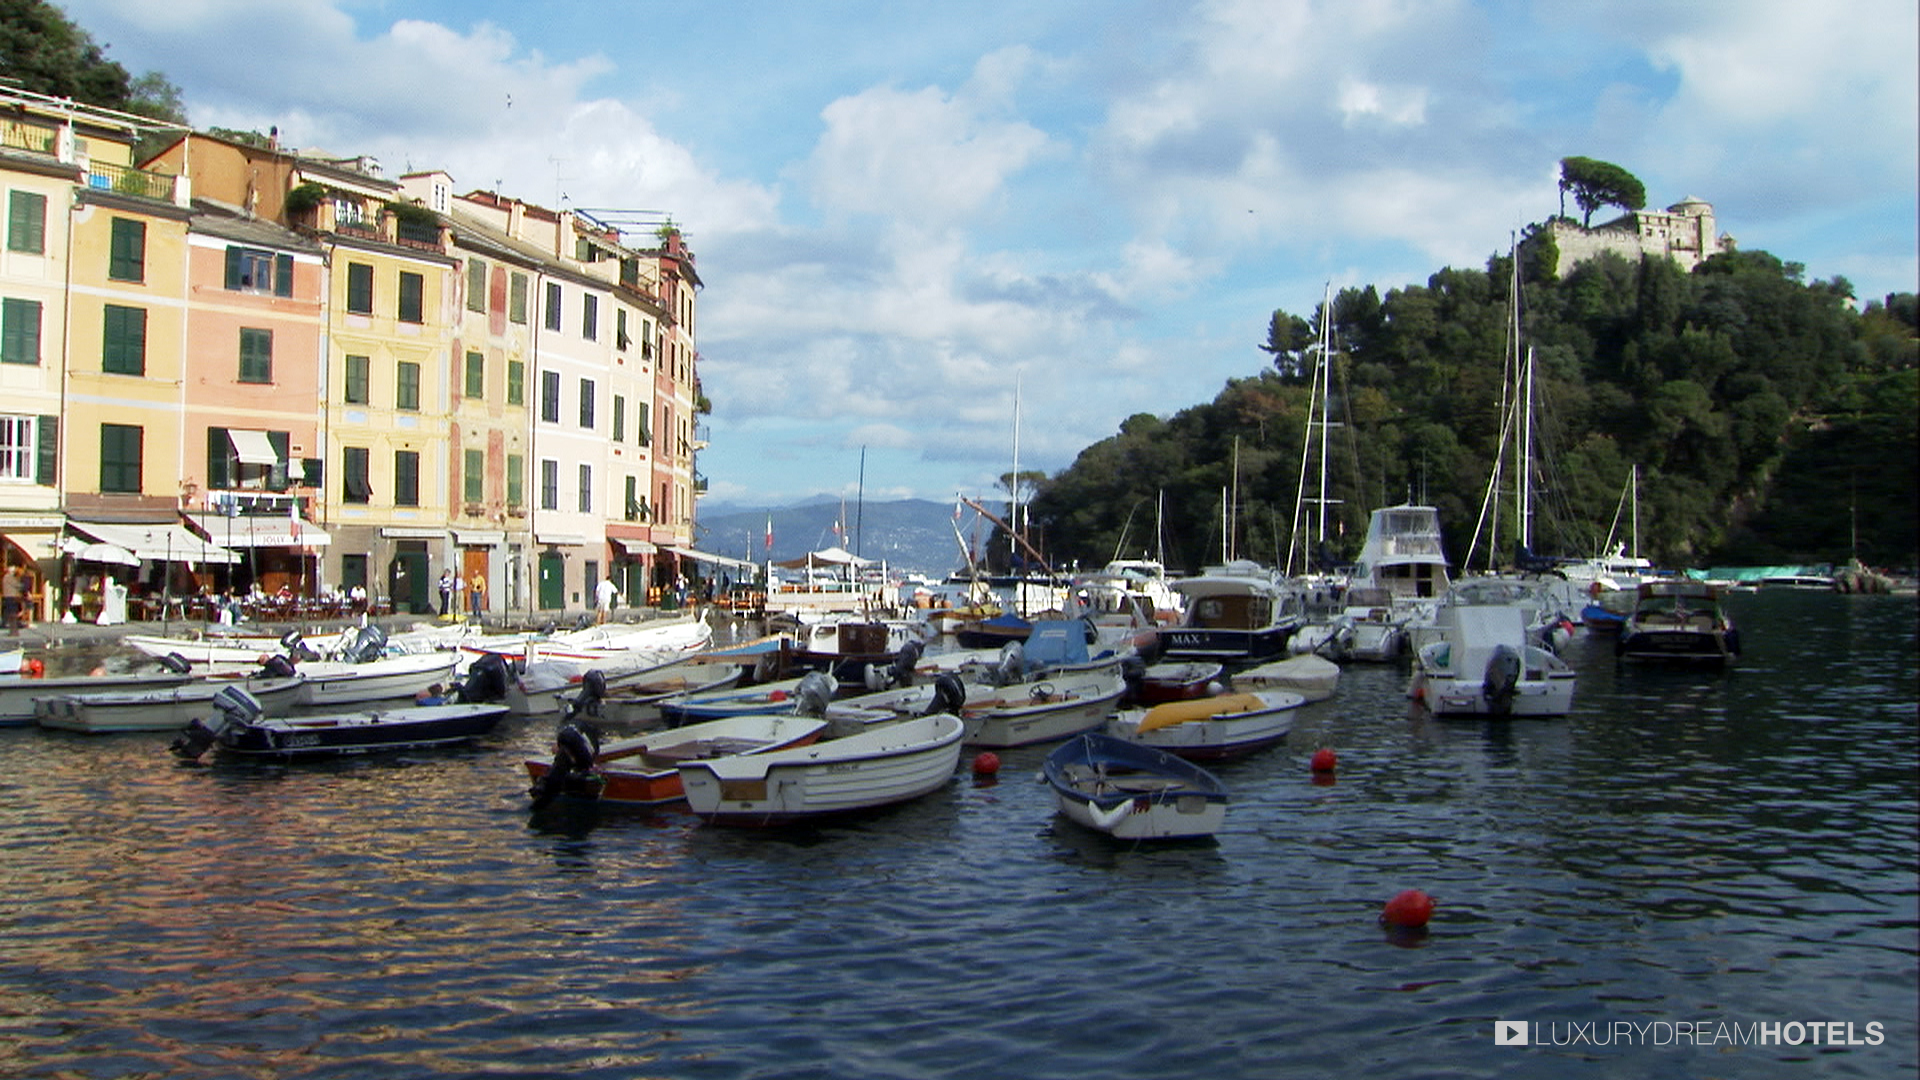 This Stately Portofino Hotel With an Illustrious History Continues to Wow -  Hotels Above Par - Boutique Hotels & Travel